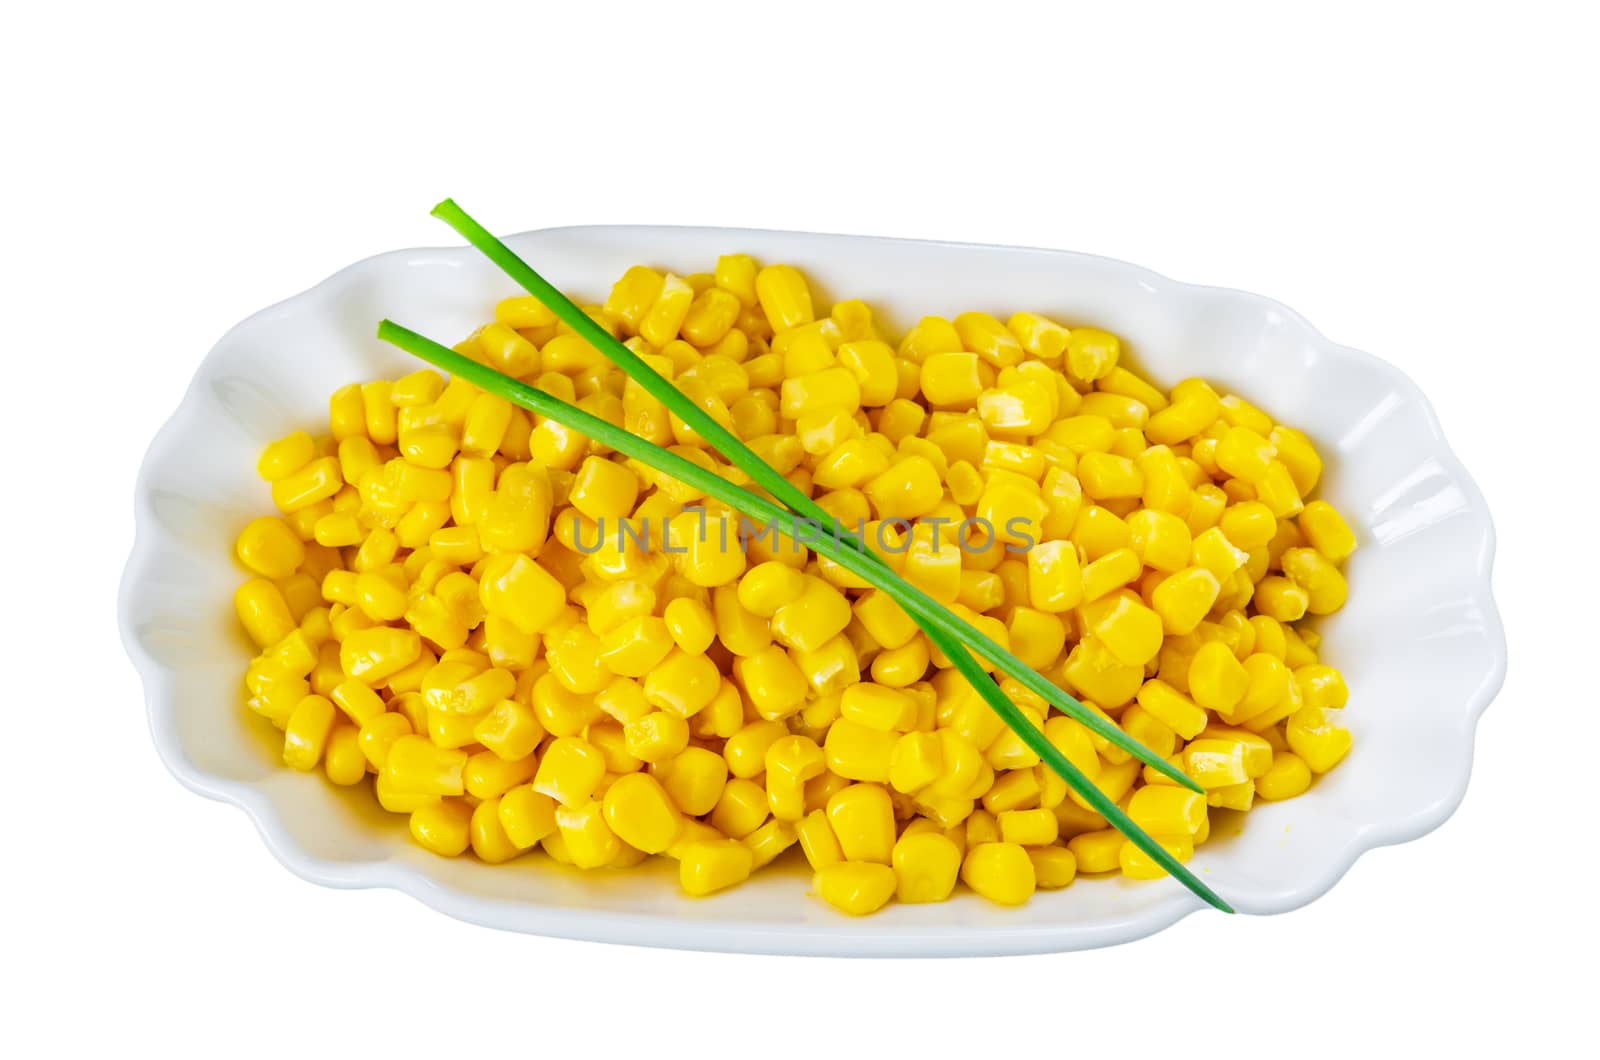 From a high angle close up of a small white ceramic bowl full of yellow corn grains. Isolated on white.